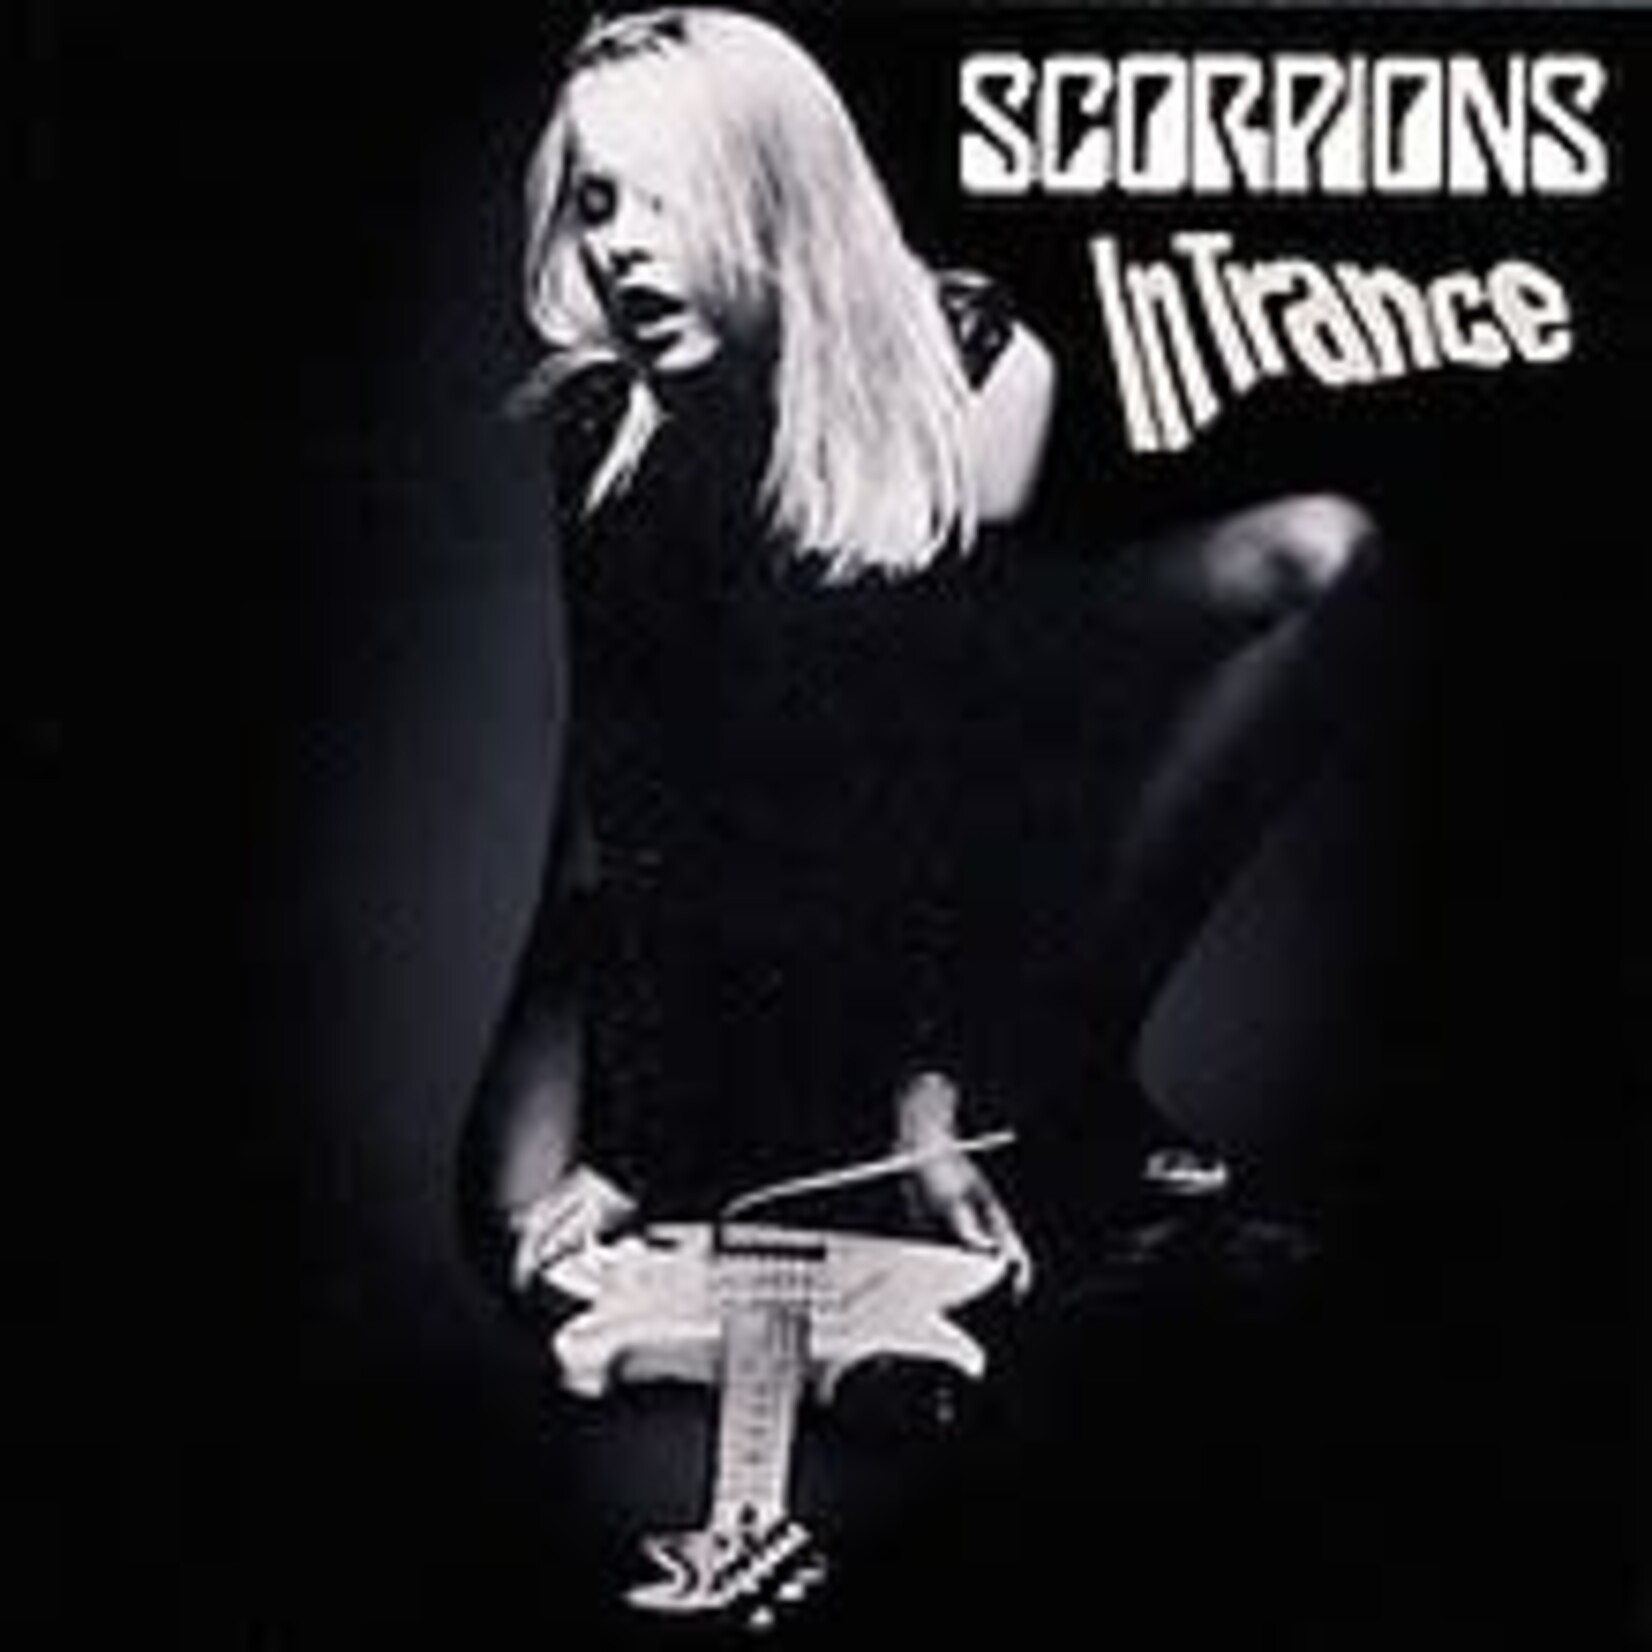 [New] Scorpions: In Trance (transparent vinyl, 180g, remastered) [BMG]